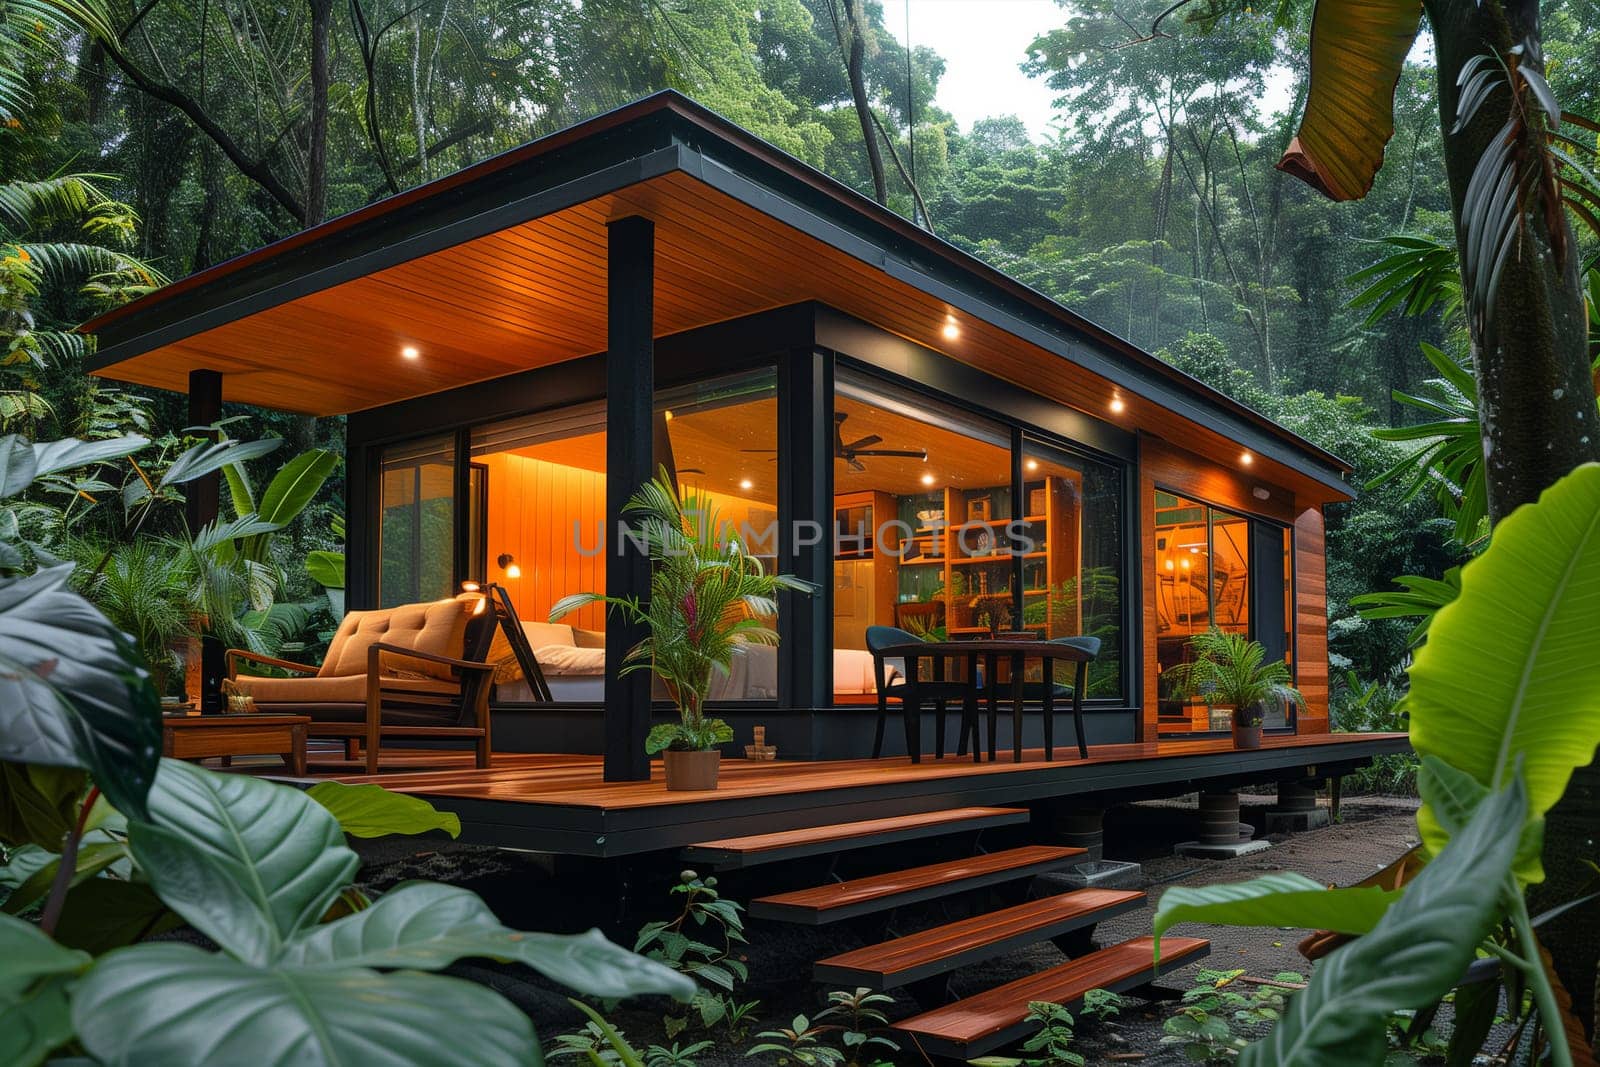 A modest house surrounded by dense forest trees.